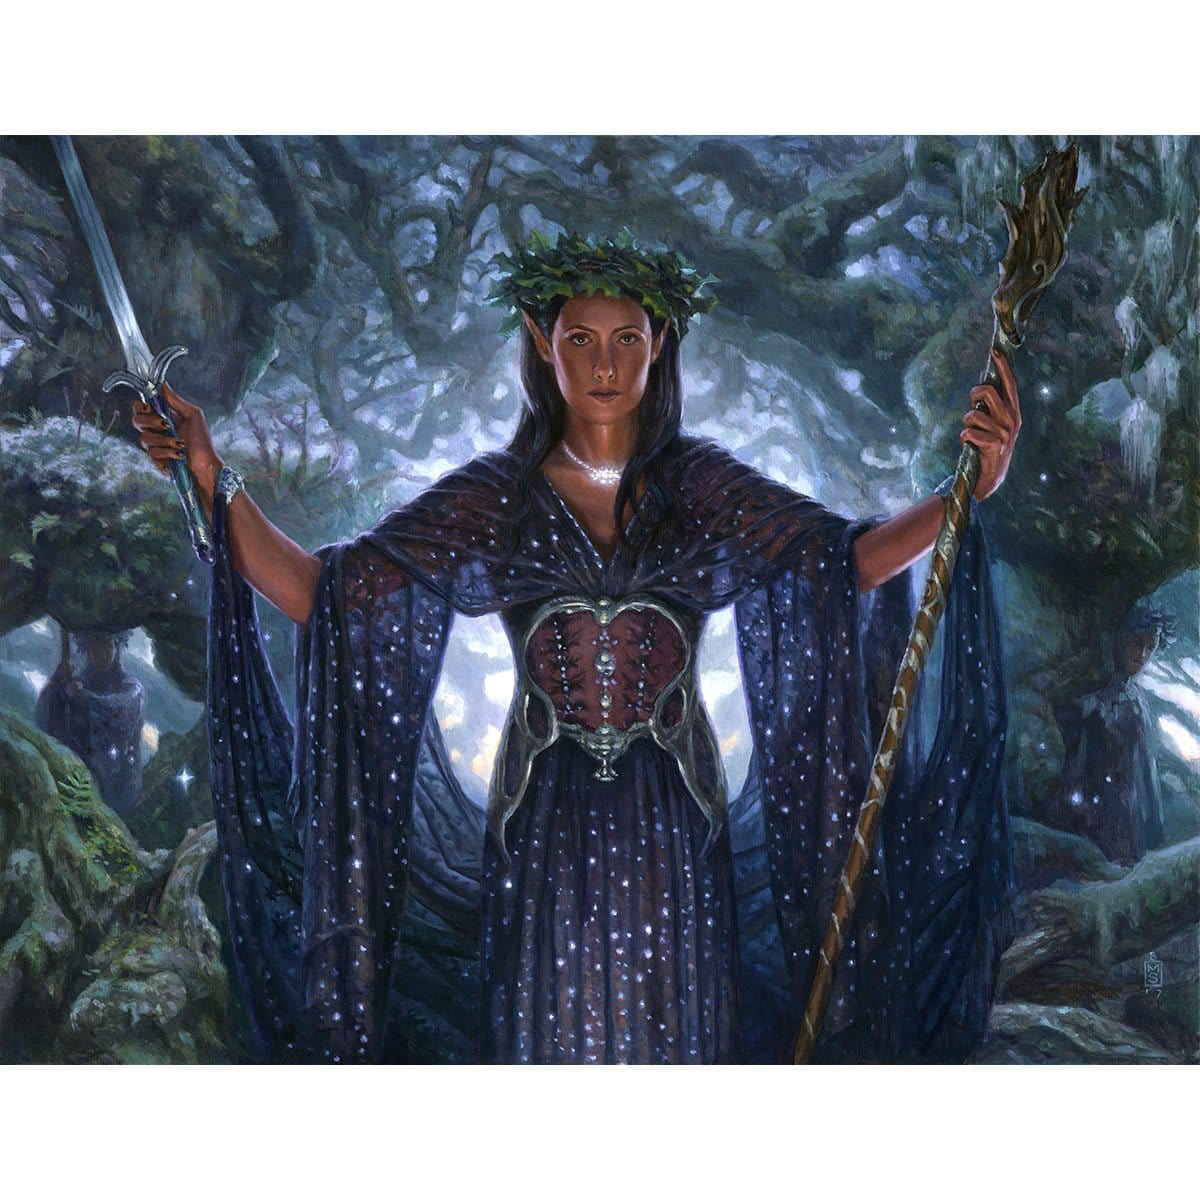 Elvish Clancaller Print - Print - Original Magic Art - Accessories for Magic the Gathering and other card games